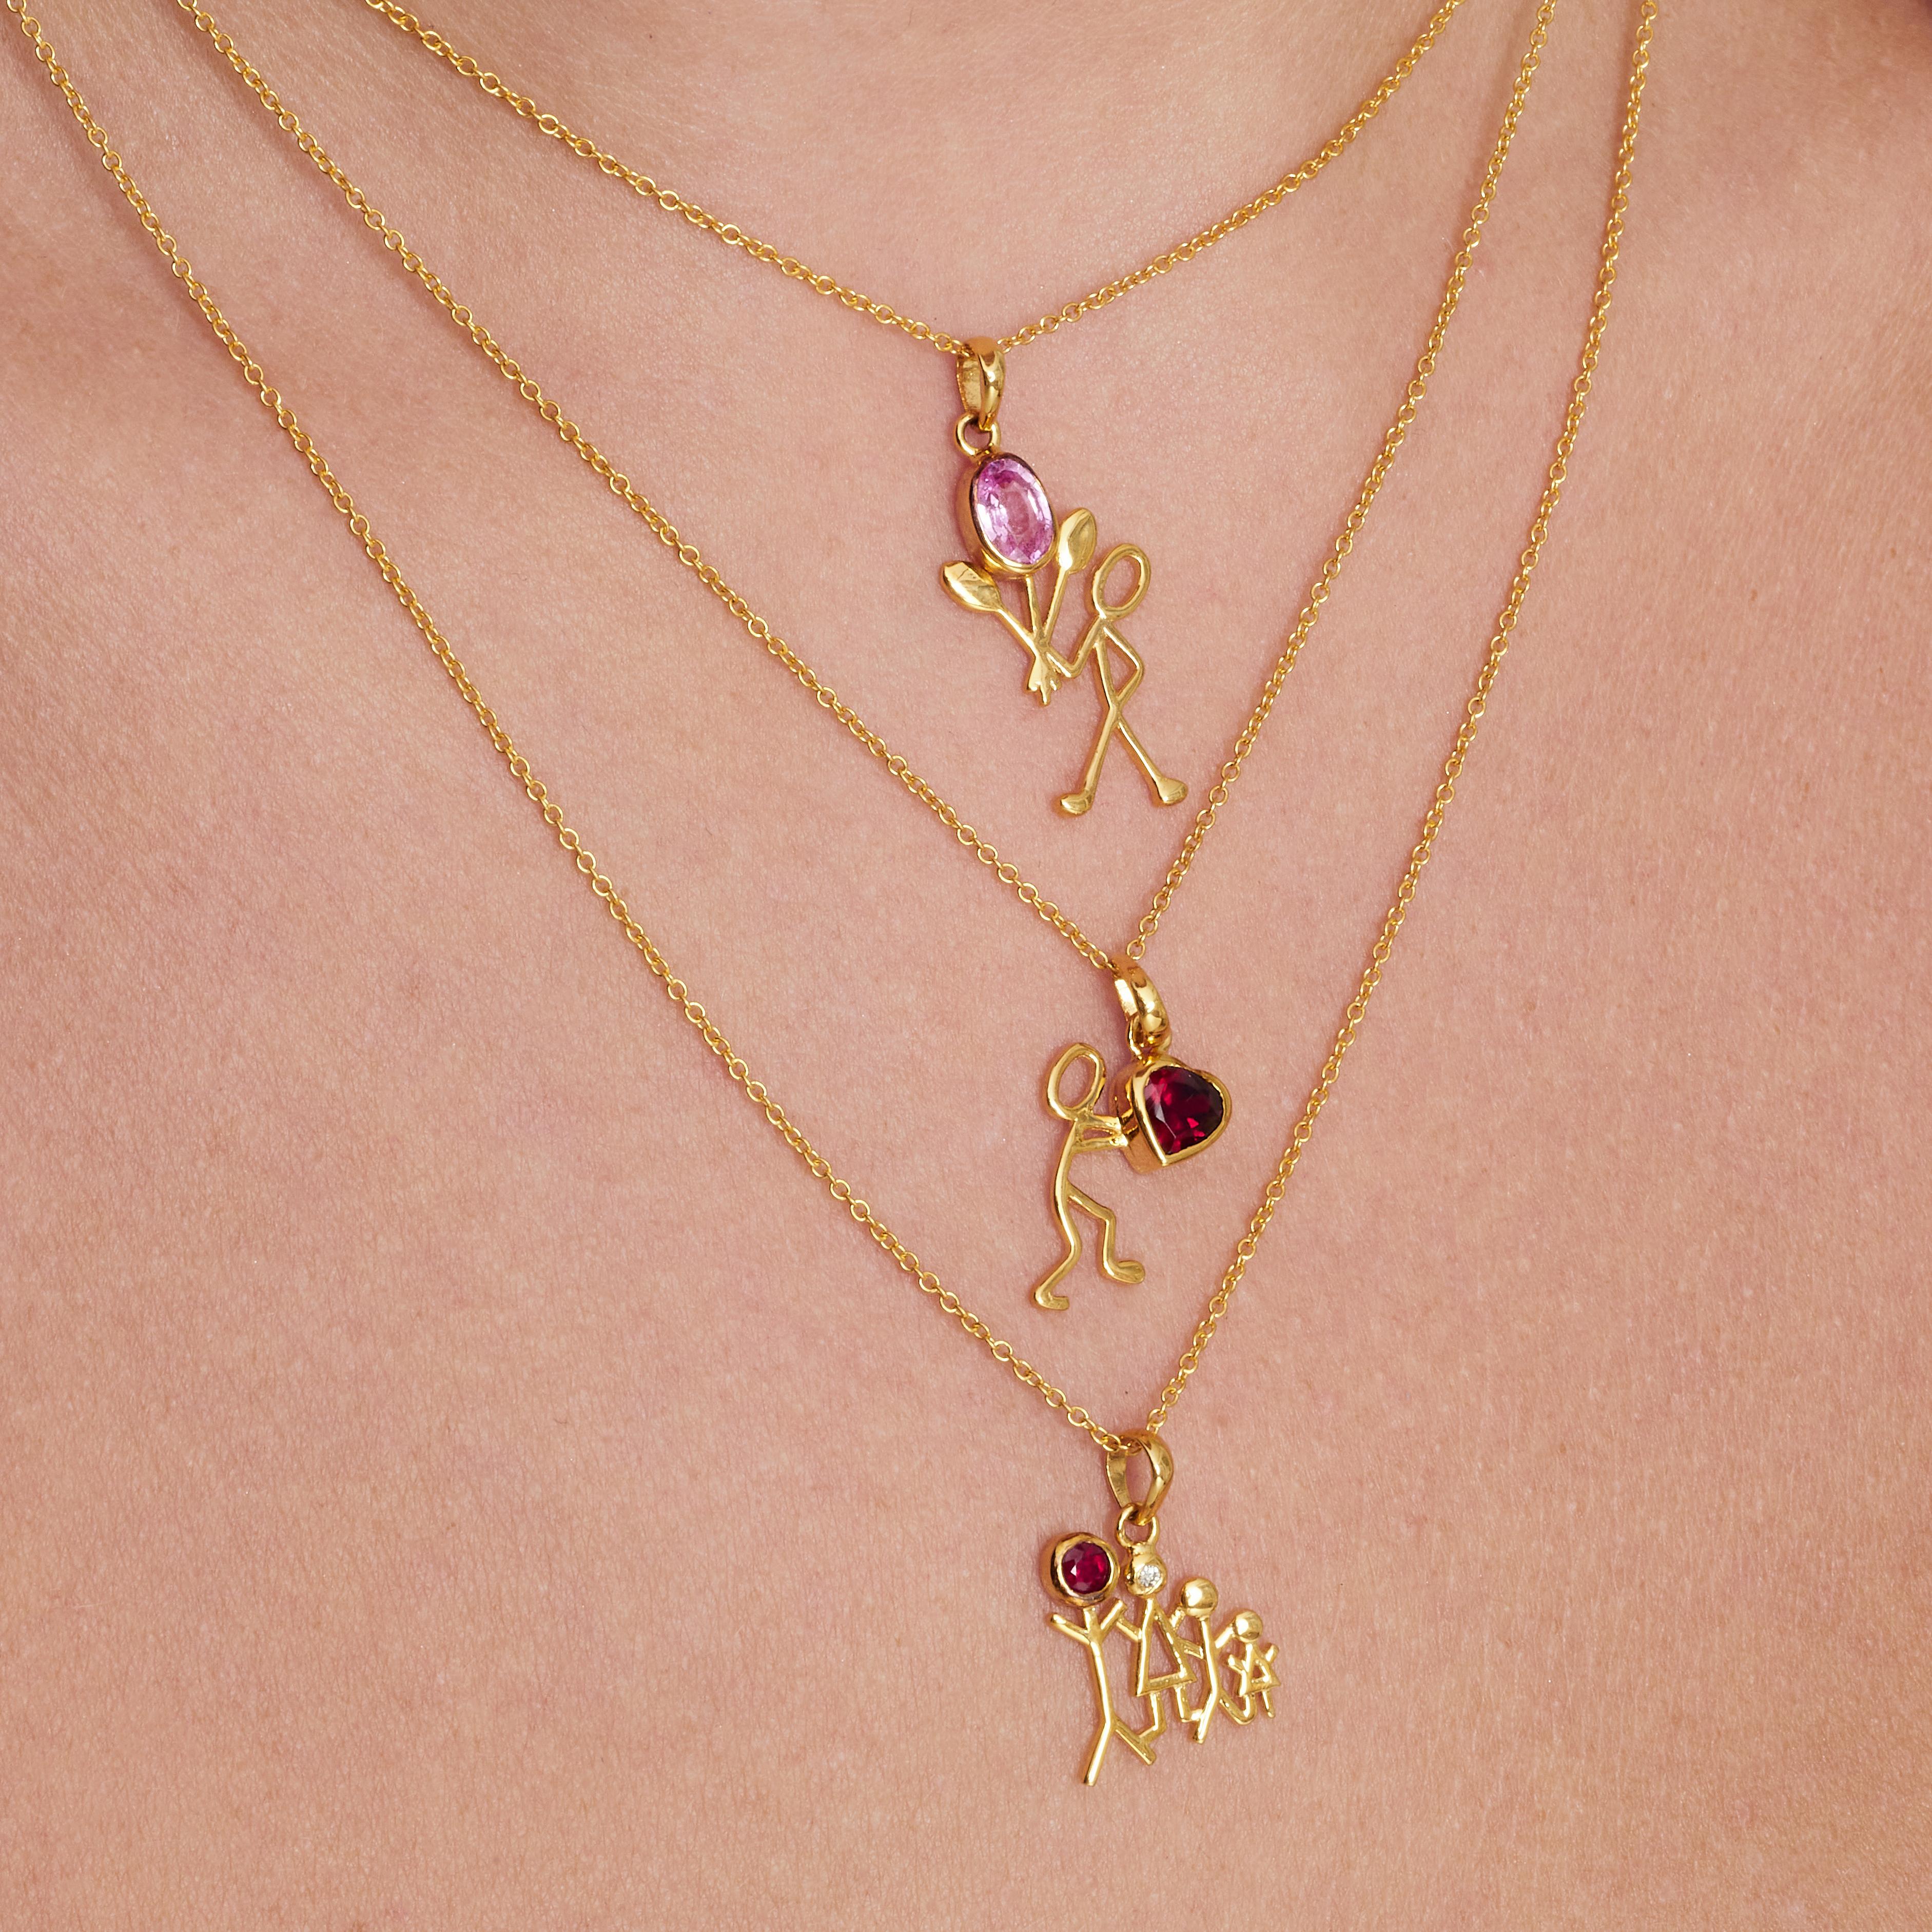 0.55 Carat Garnet Yellow Gold Stick Figure with Heart Pendant Necklace.

This pendant necklace was handmade with 18-karat yellow gold. It features a 0.55-carat garnet. This pendant is on an 18-inch chain necklace with a lobster clasp. The pendant